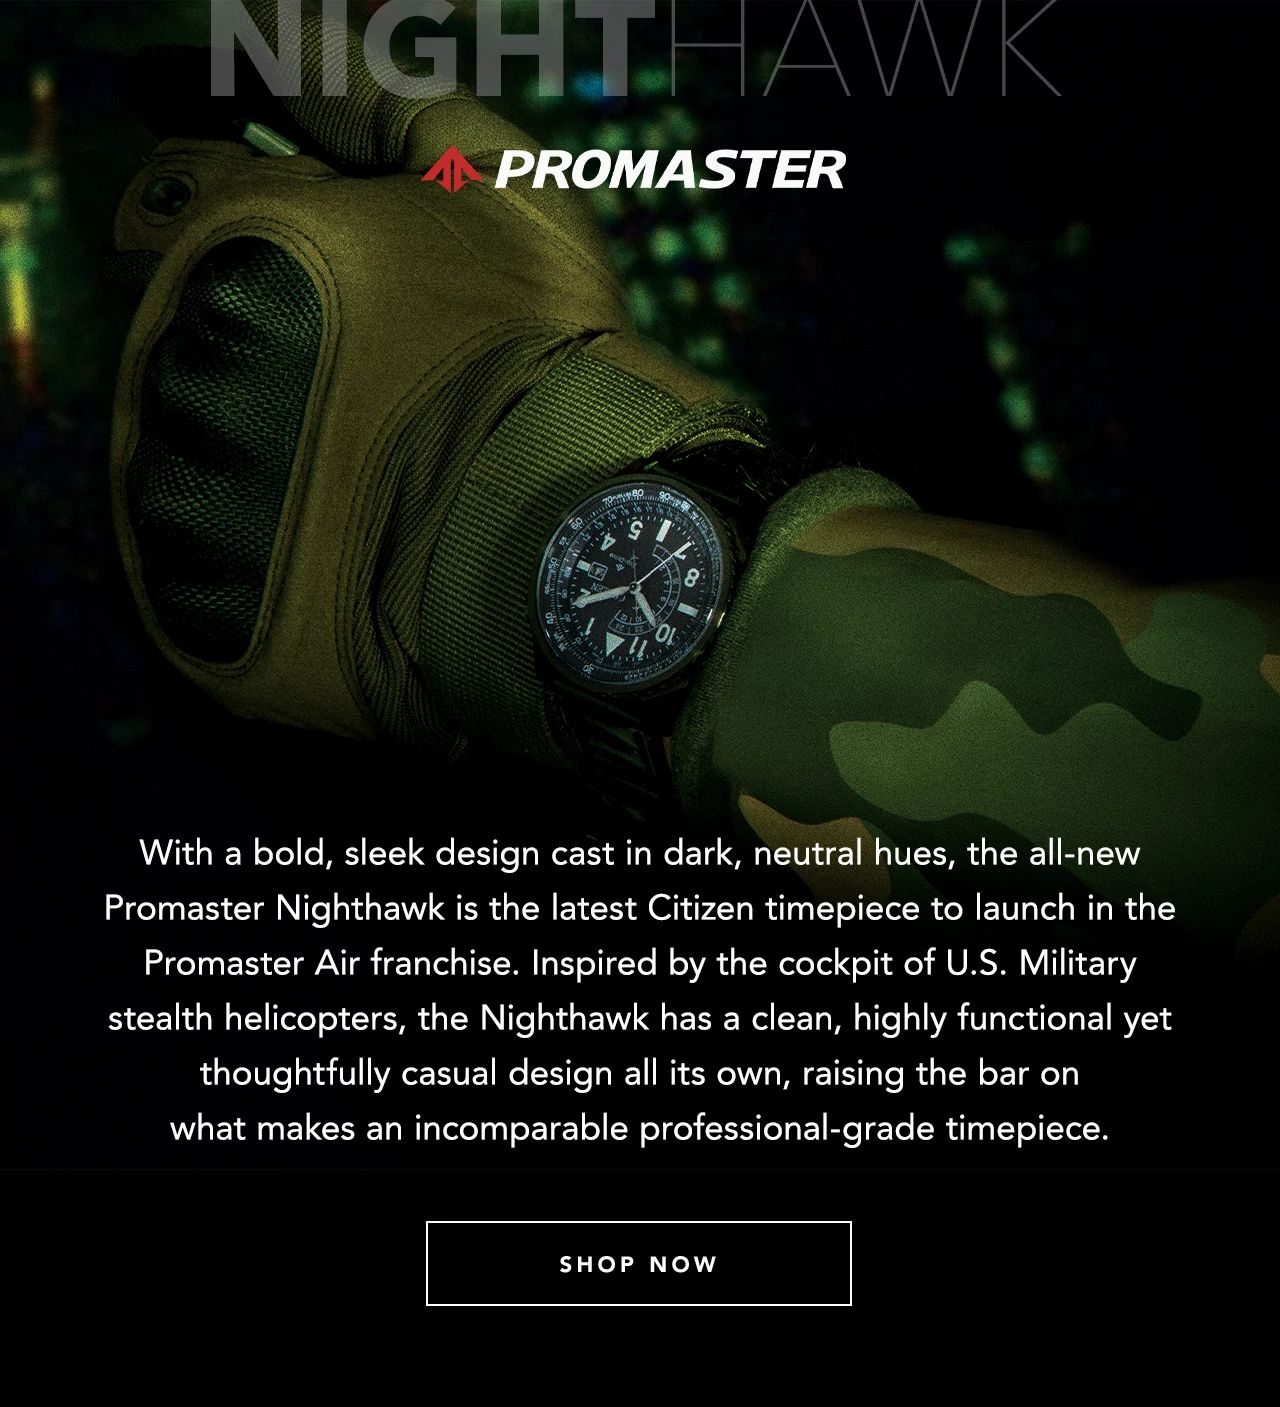 With a bold, sleek design cast in dark, neutral hues, the all-new Promaster Nighthawk is the latest Citizen timepiece to launch in the Promaster Air franchise. Inspired by the cockpit of U.S. Military stealth helicopters, the Nighthawk has a clean, highly functional yet thoughtfully casual design all its own, raising the bar on what makes an incomparable professional-grade timepiece. 